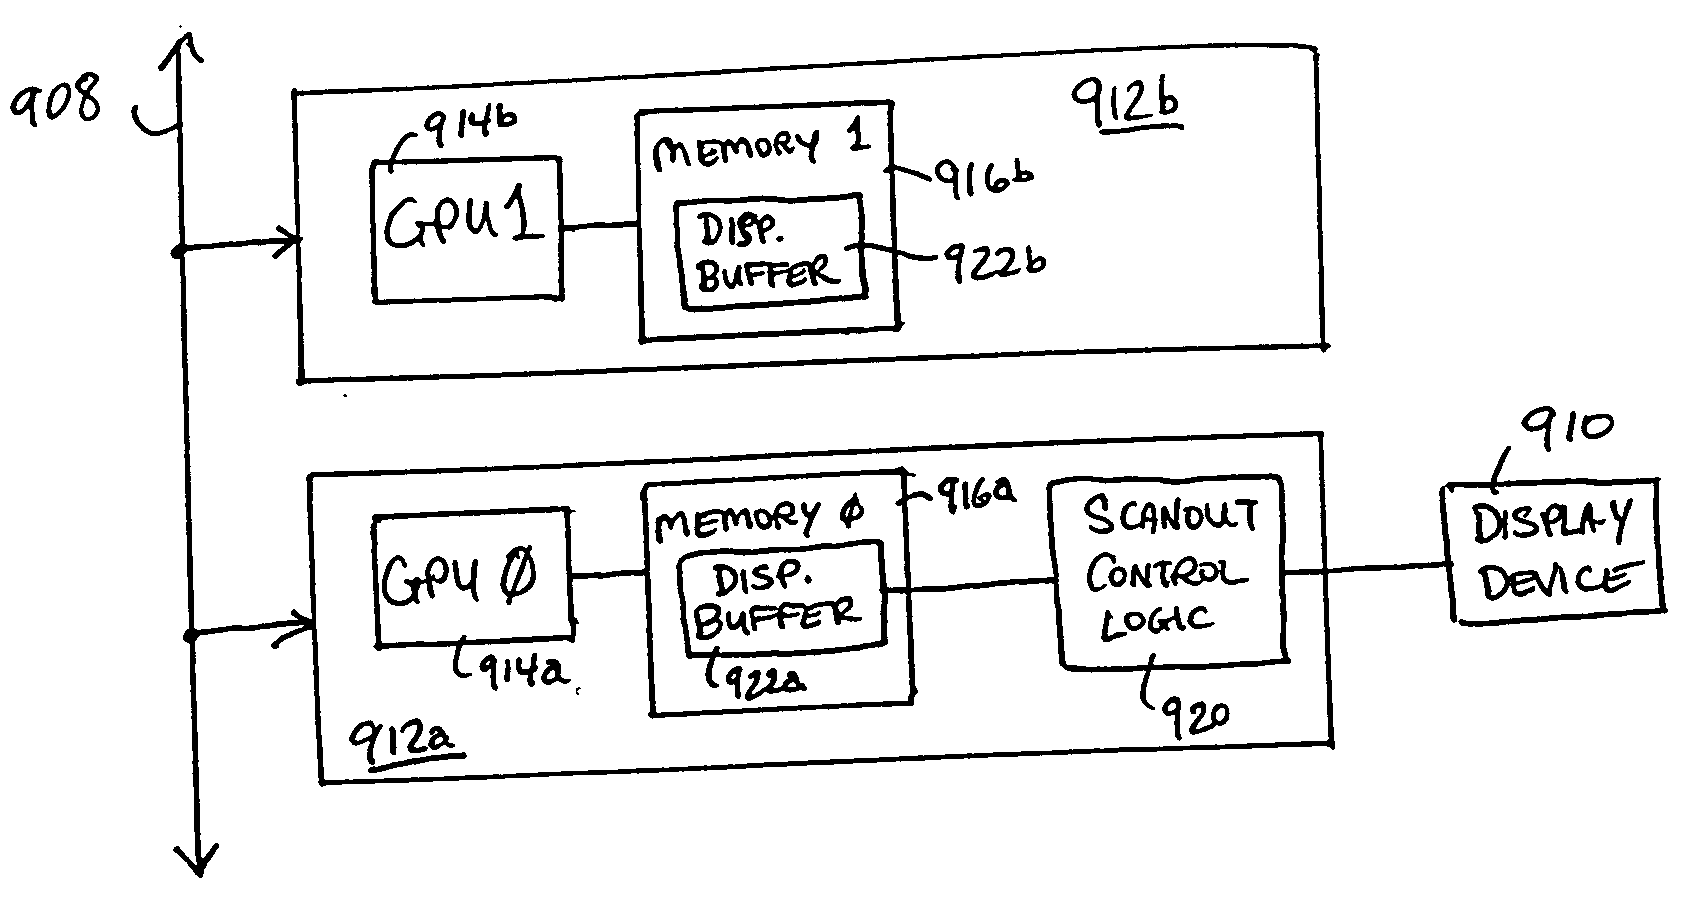 Adaptive load balancing in a multi-processor graphics processing system